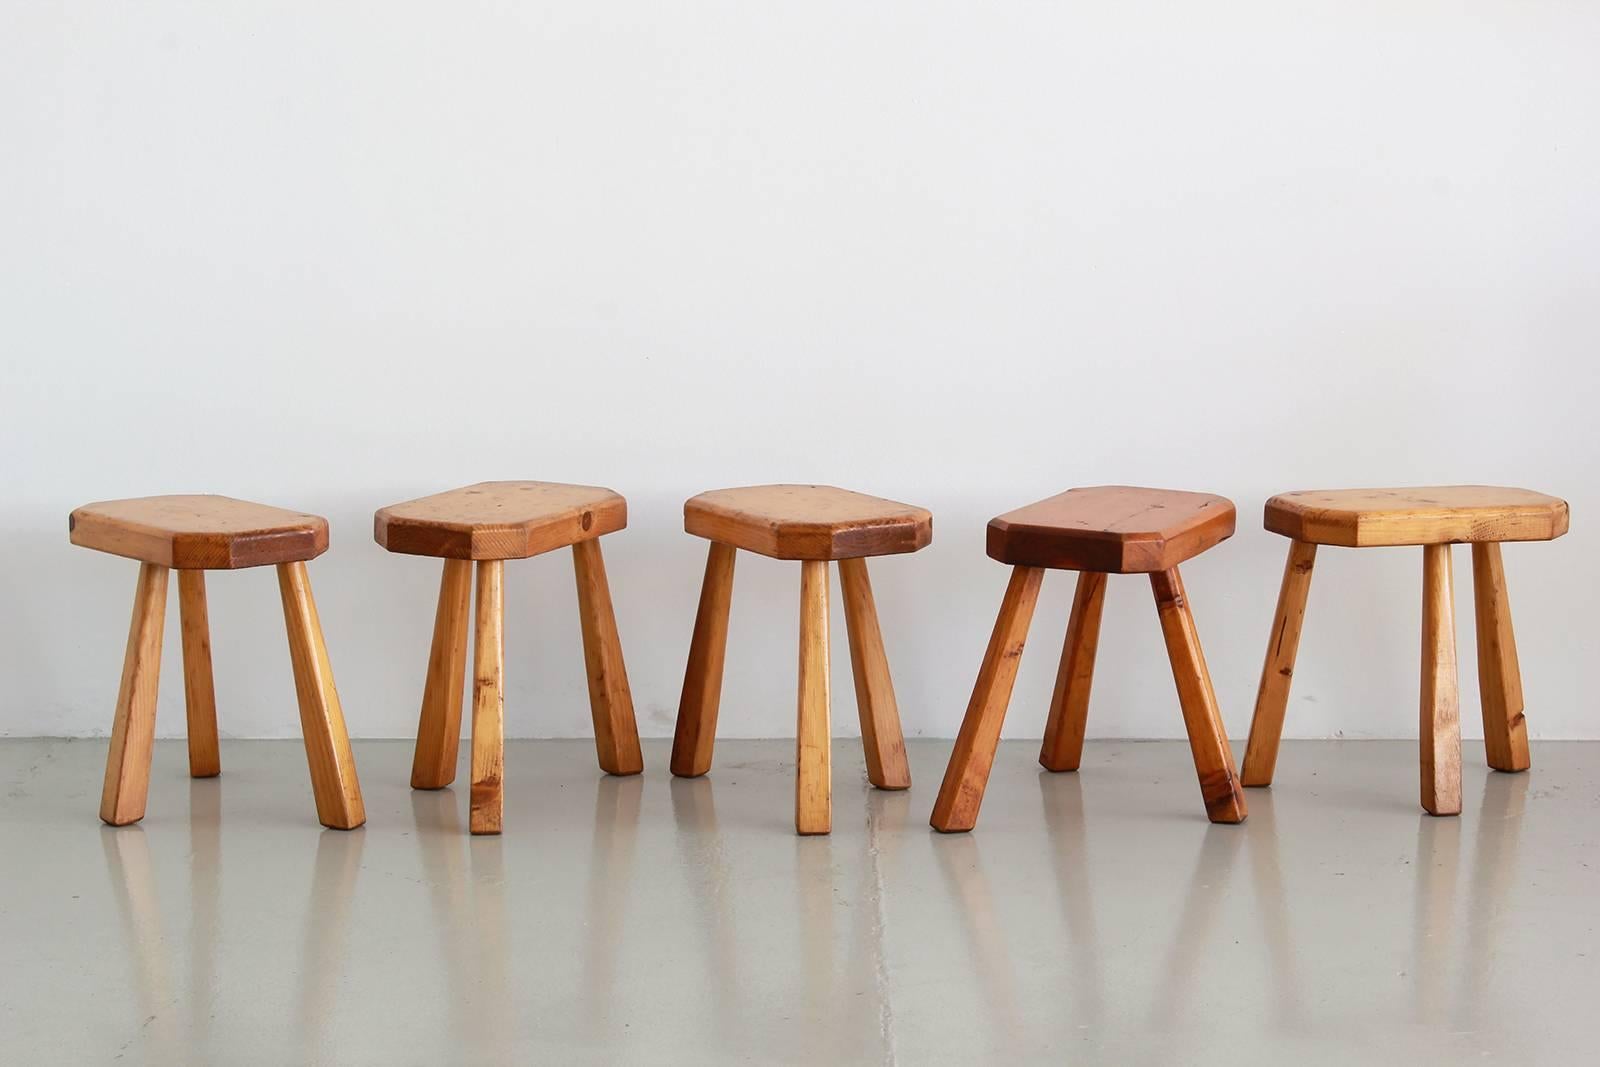 Petite oak stools in the style of Charlotte Perriand with three legs and octagon shaped seats. Three available. Sold individually.